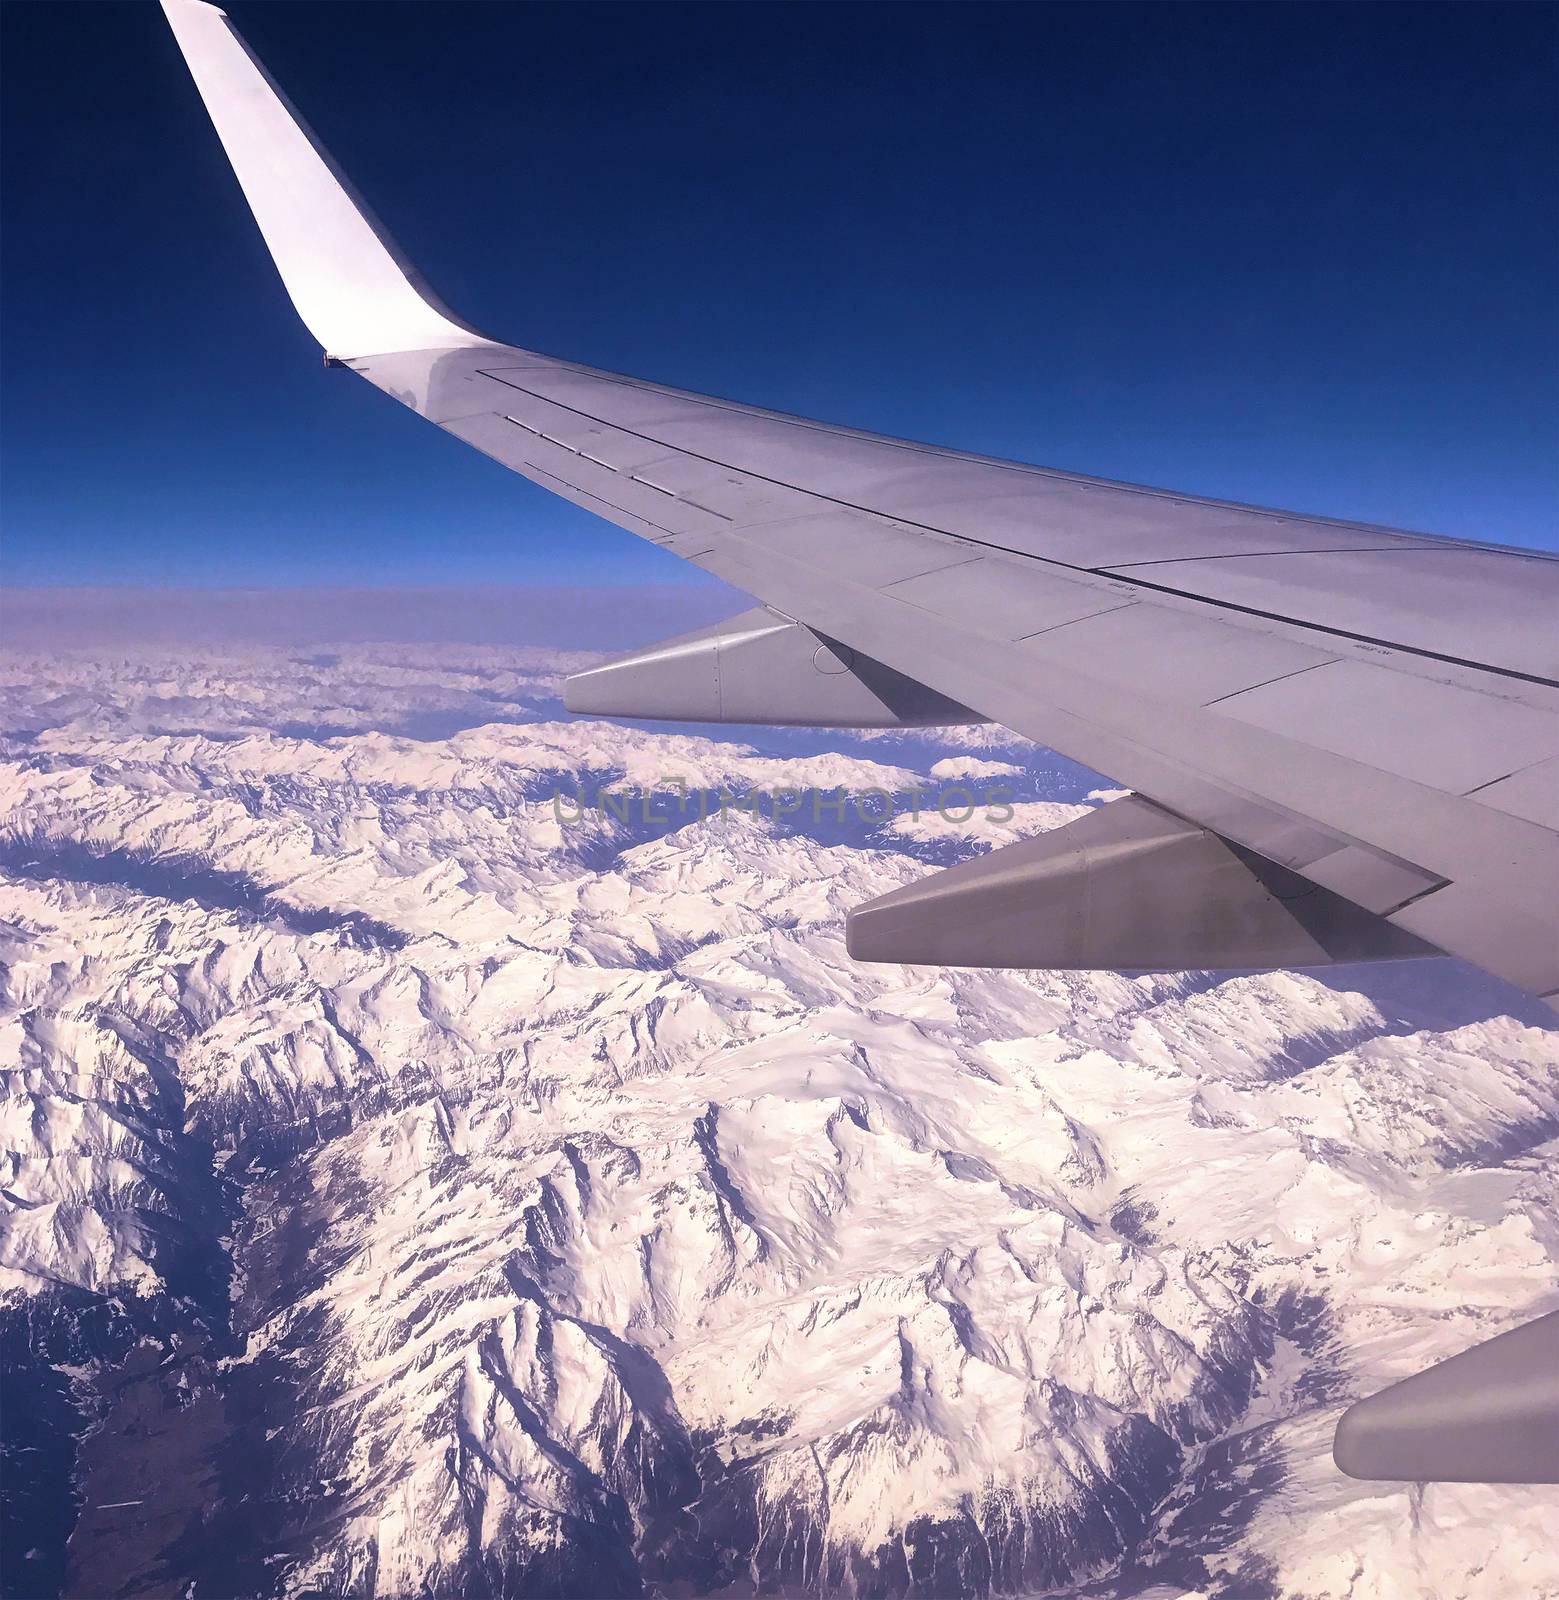 Window view from the cabin of a plane while flying over the Alps Mountain Range.